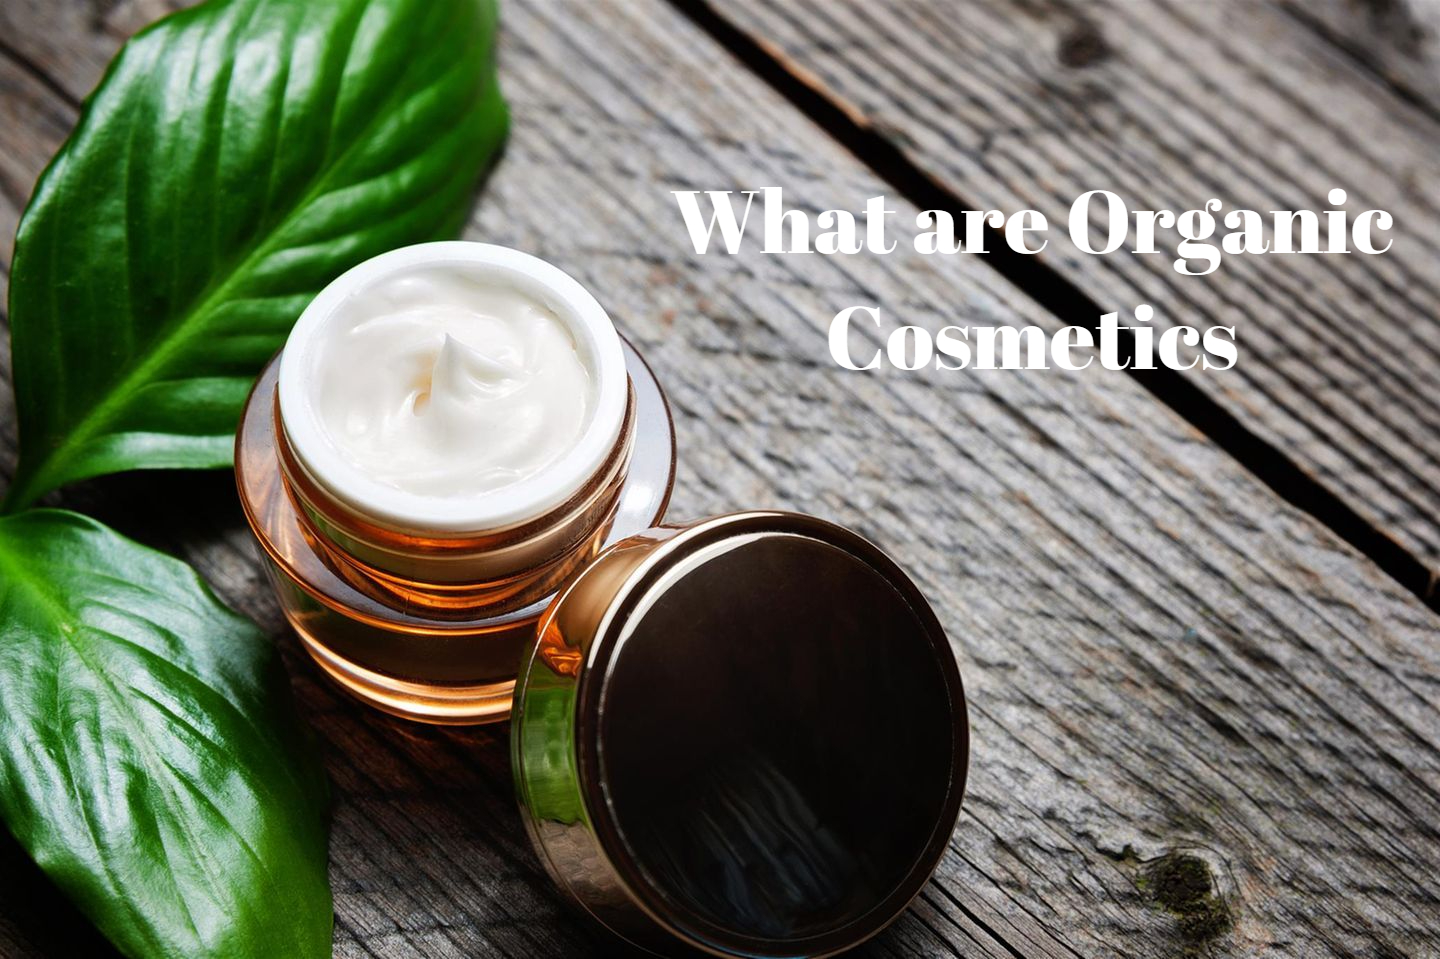 What are Organic Cosmetics